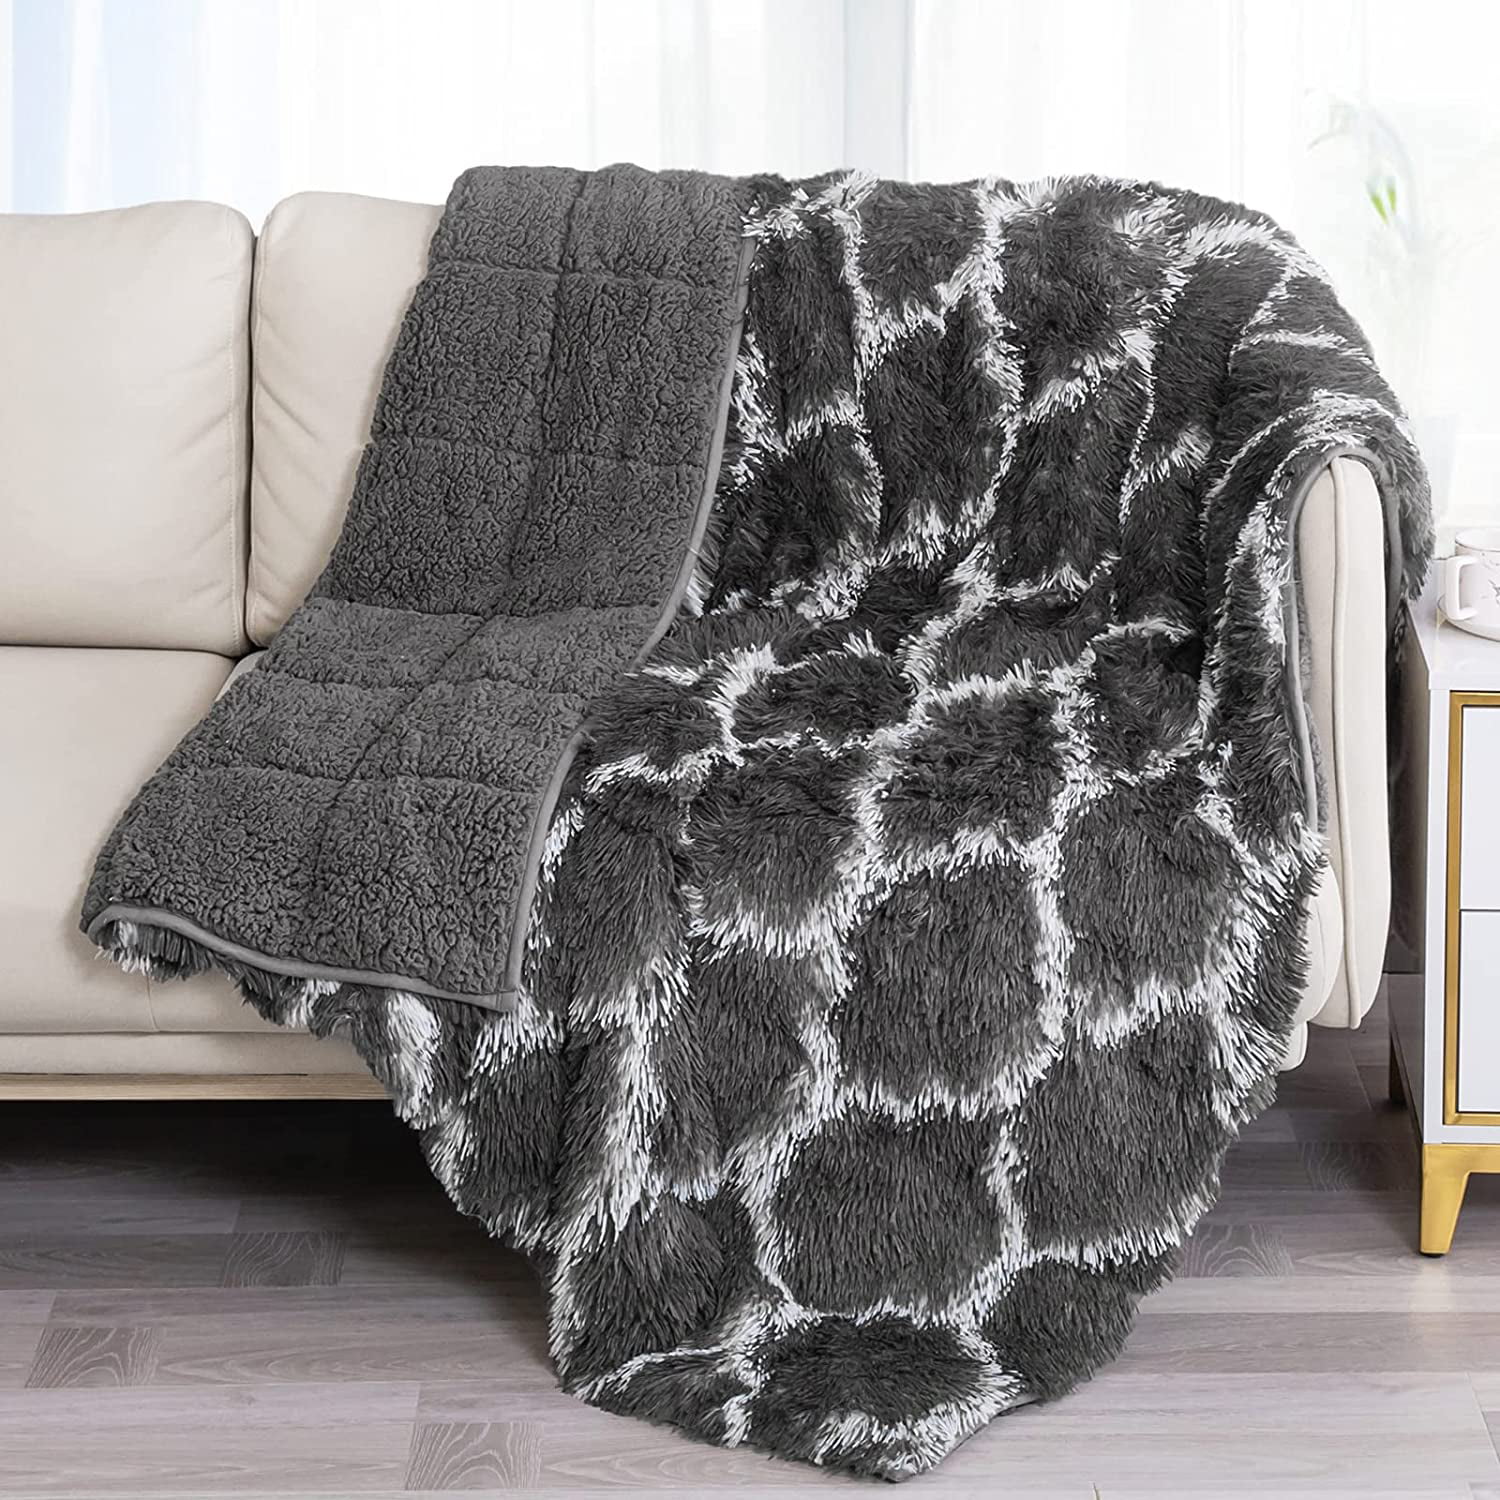 immtree Faux Fur Weighted Blanket 15lbs for Adult,Moroccan Printed Luxury Cozy Long Hair Heavy Blanket 60 x 80 inches Grey,Fluffy Plush Sherpa Super Soft for Bed Couch Sofa Decorate Home 